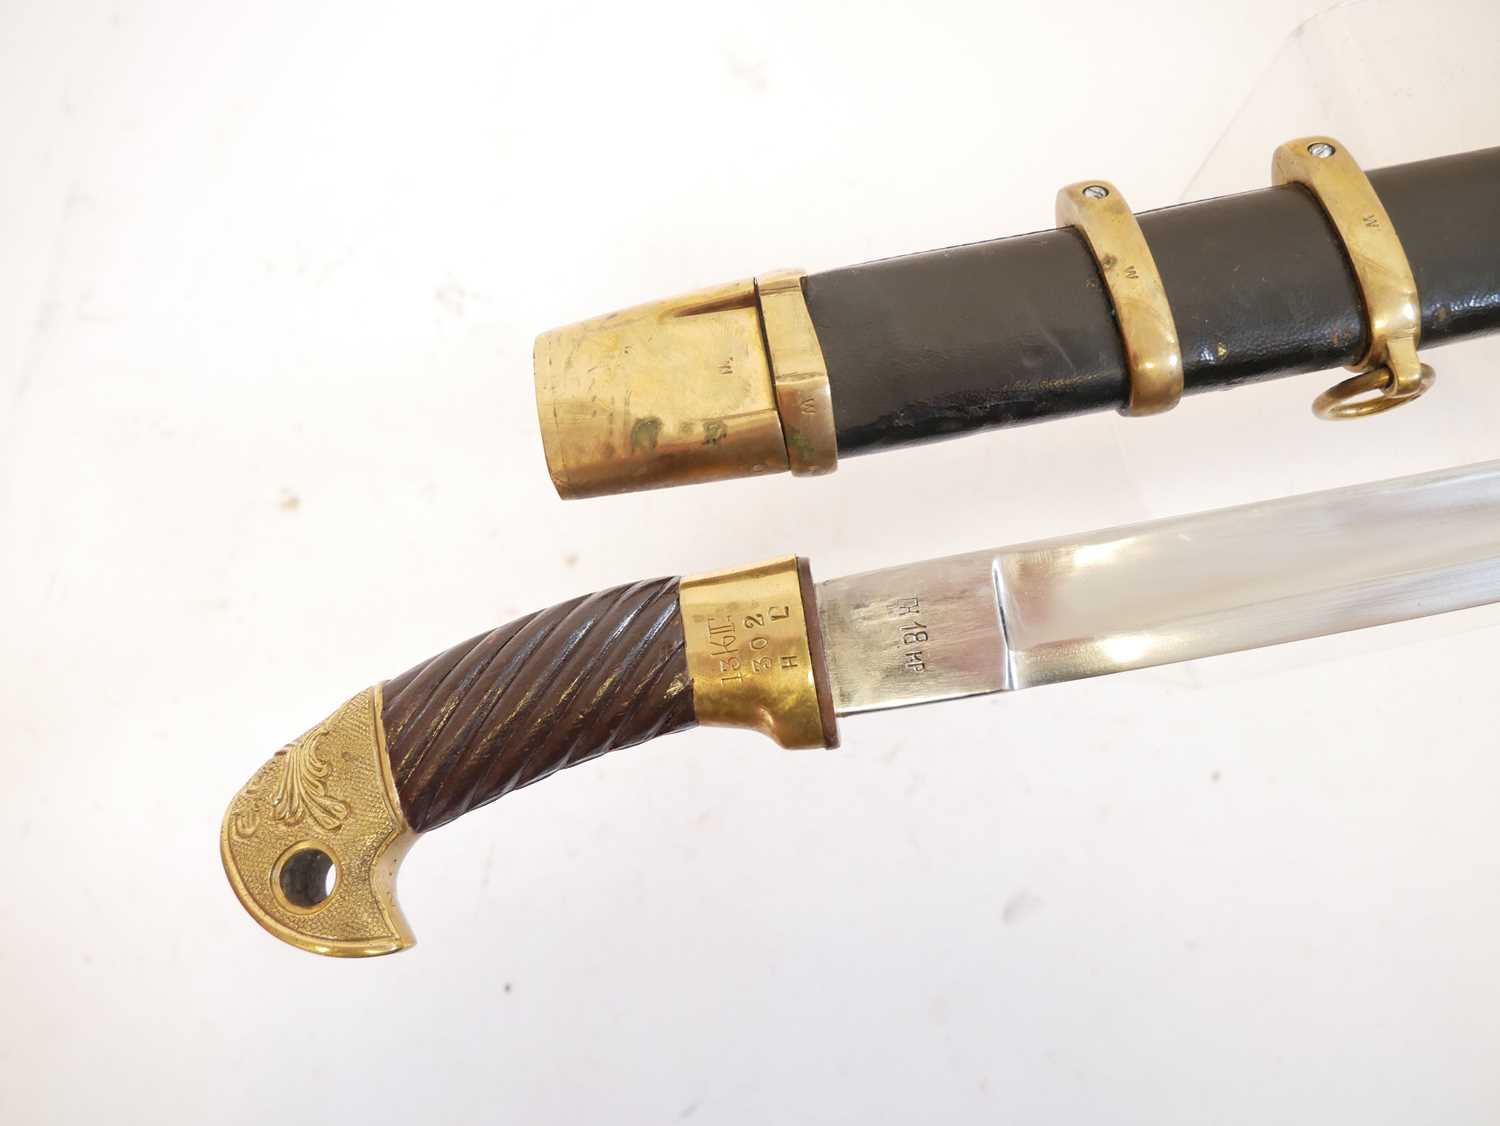 Reproduction copy of a Russian Cossak Shaska sword and scabbard. Buyer must be over the age of 18. - Image 3 of 9